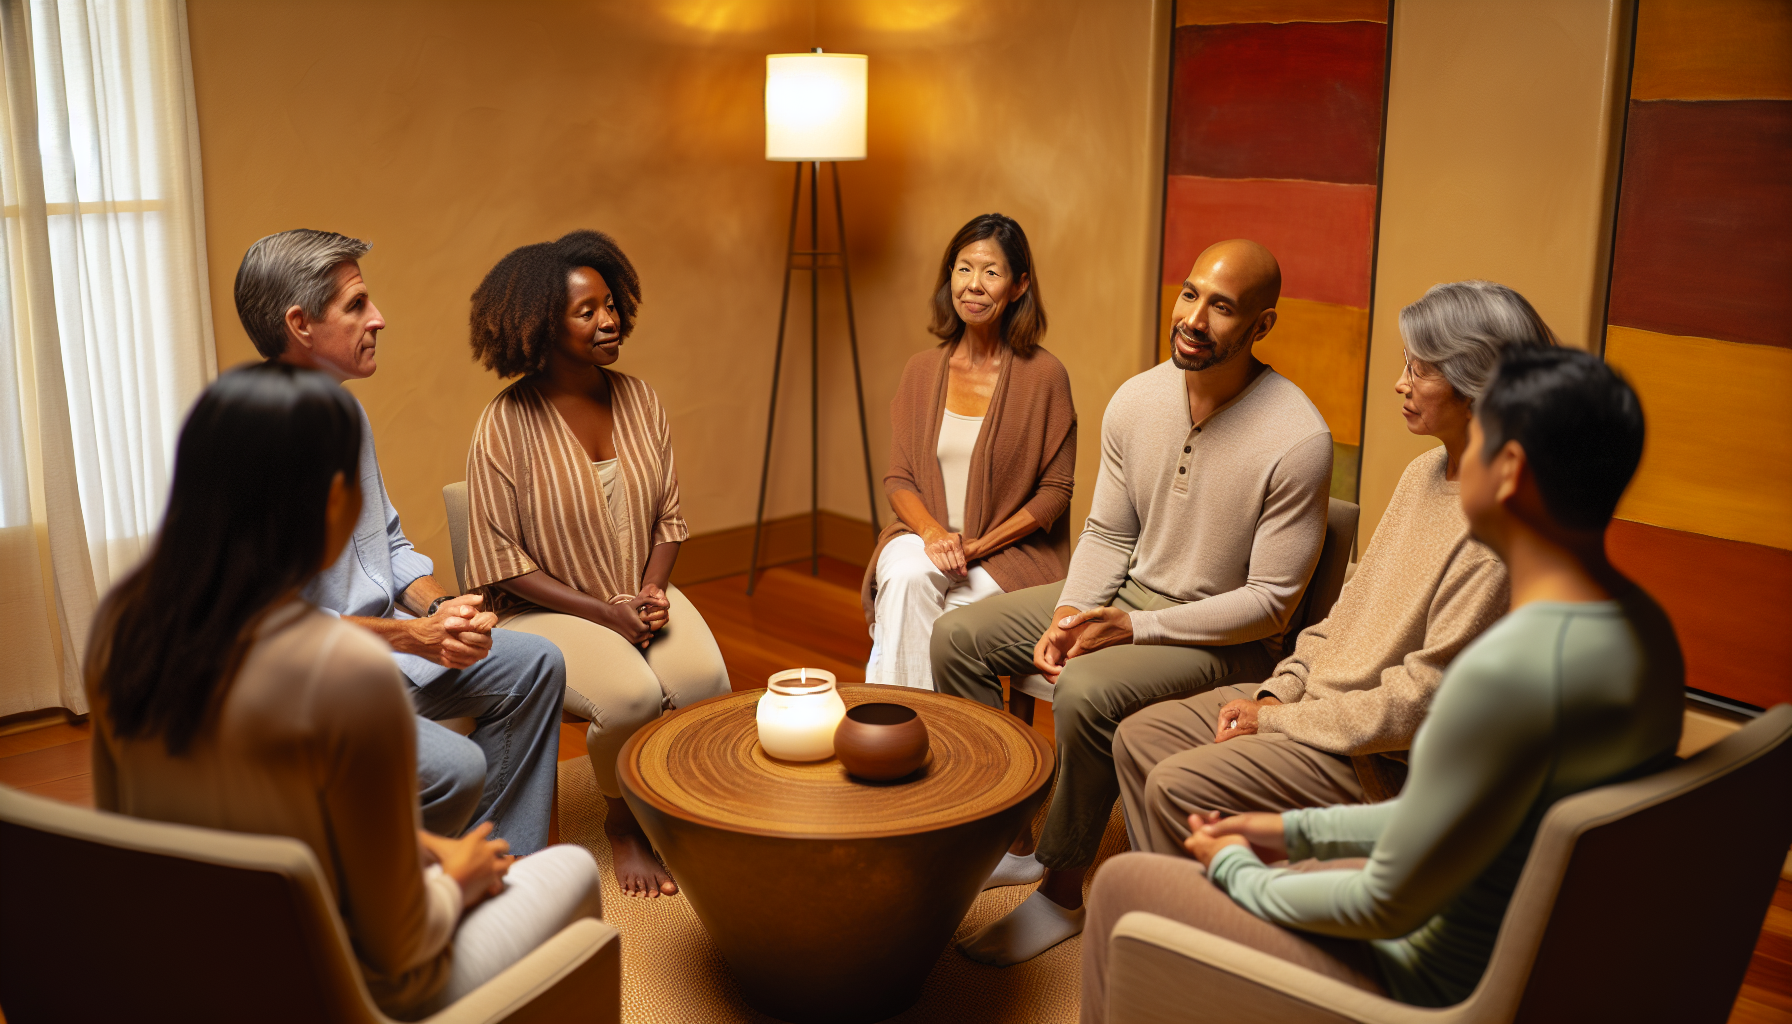 Group of diverse individuals engaged in a mindfulness discussion